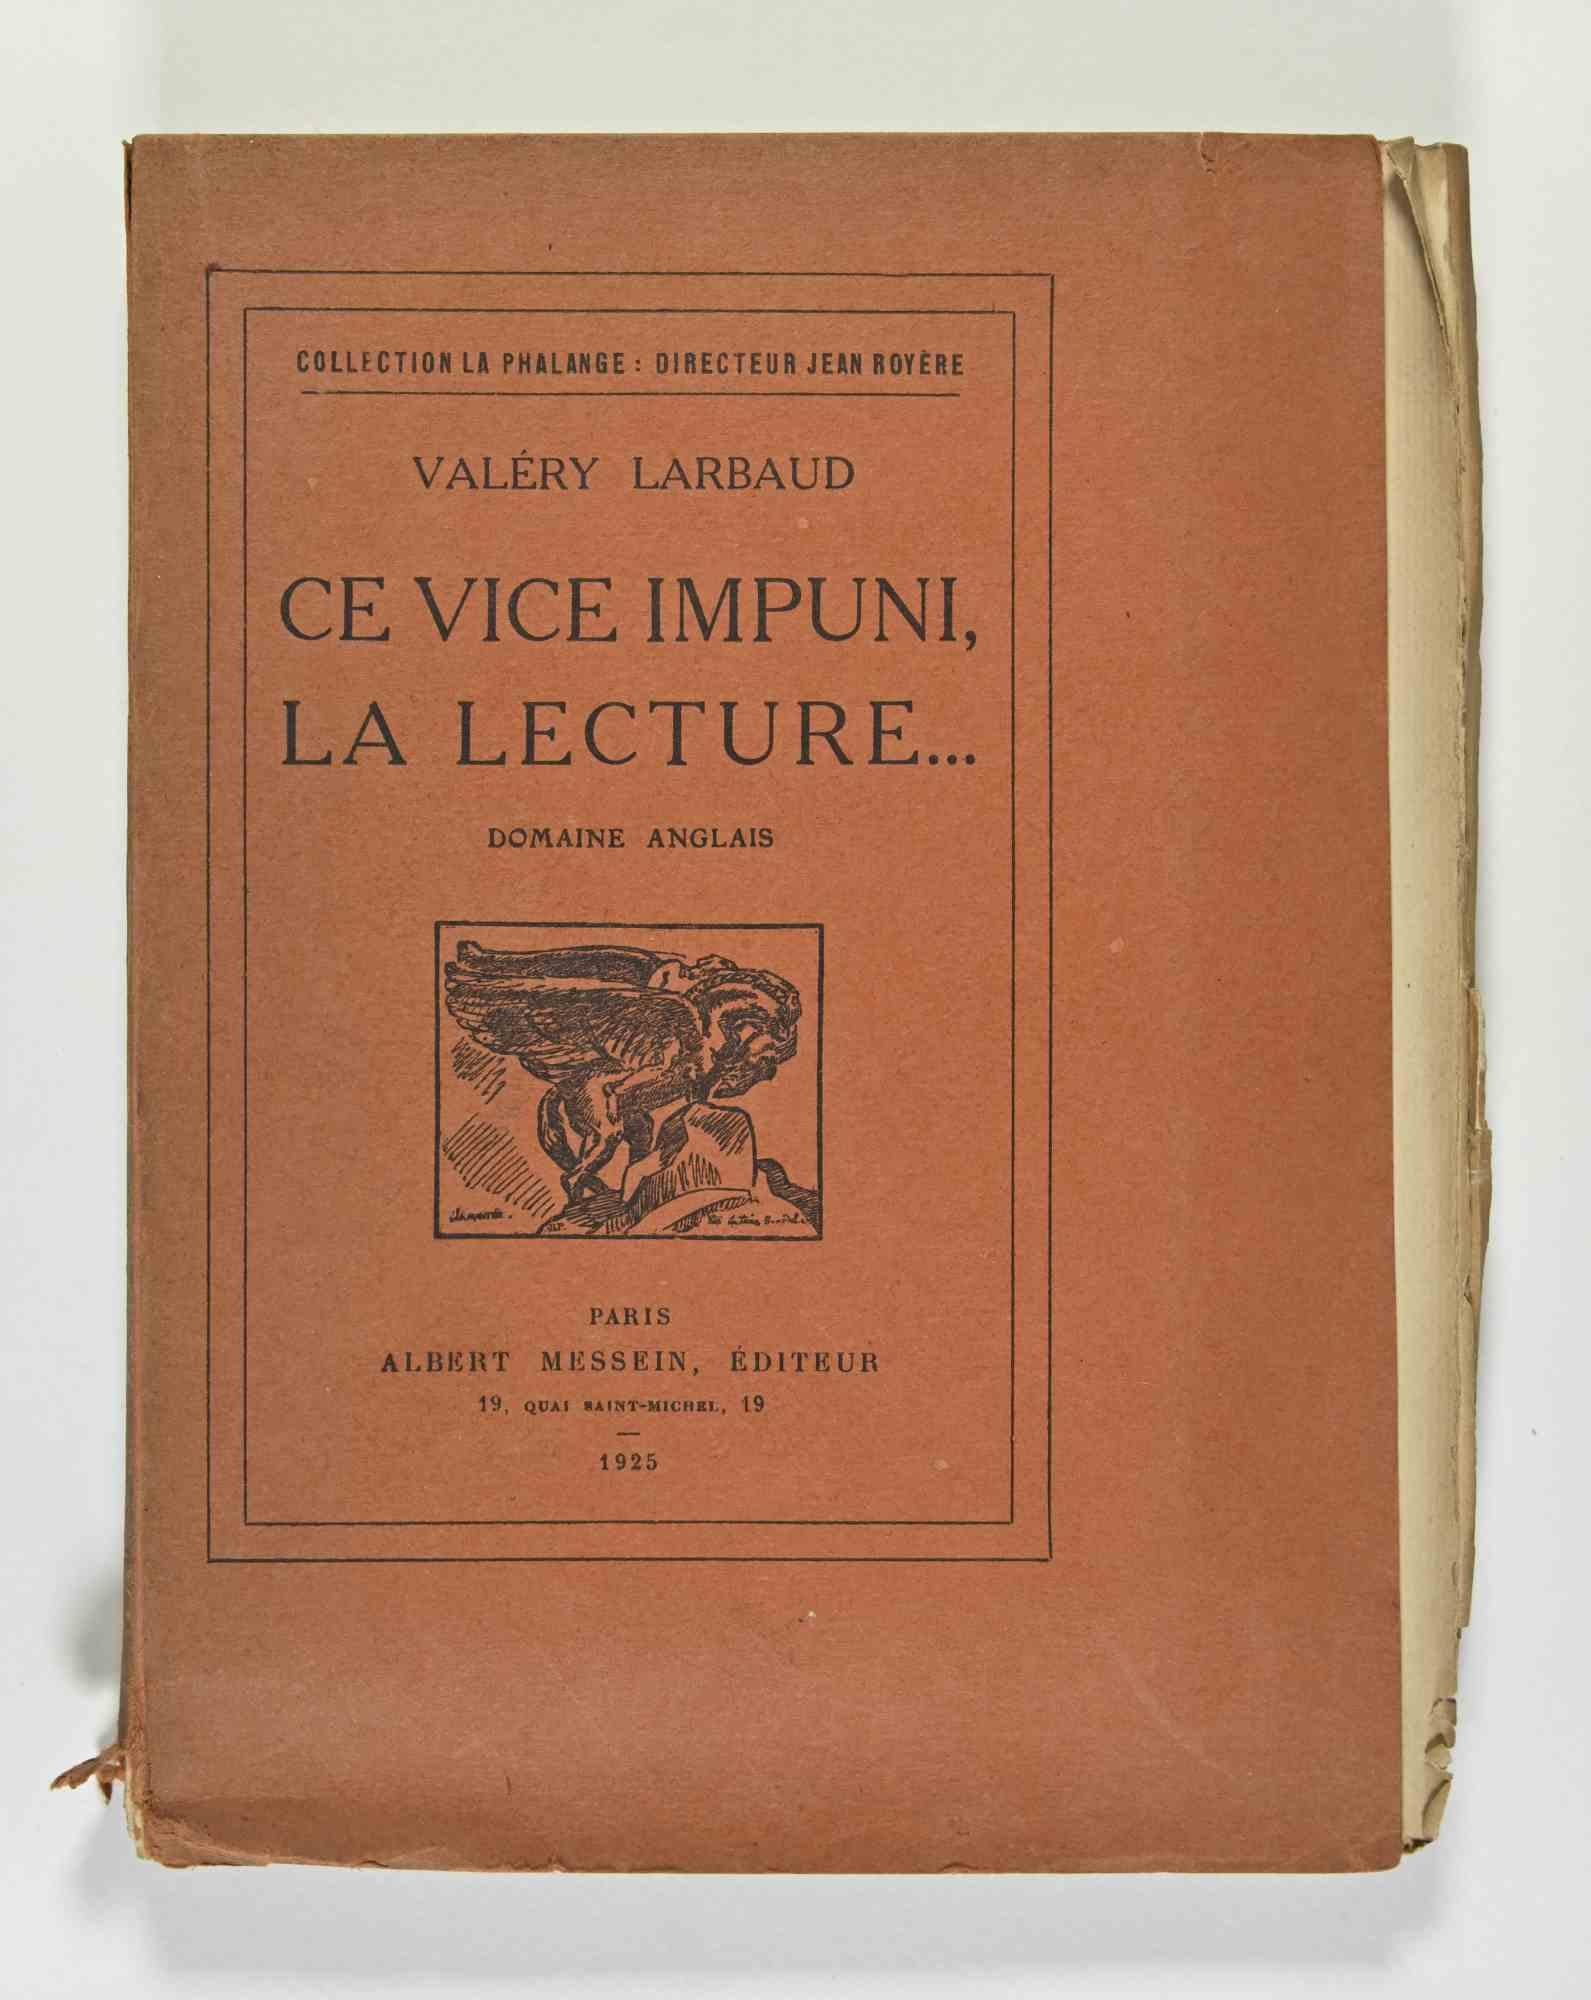 Ce vice impuni, la Lecture  is a book written by Valery Larbaud.

Collection La Phalange : Directeur Jean Royere.

Paris, Albert Messein, Editeur , 1925.

Good conditions, expect for some yellowing and damaged sheet margins. 